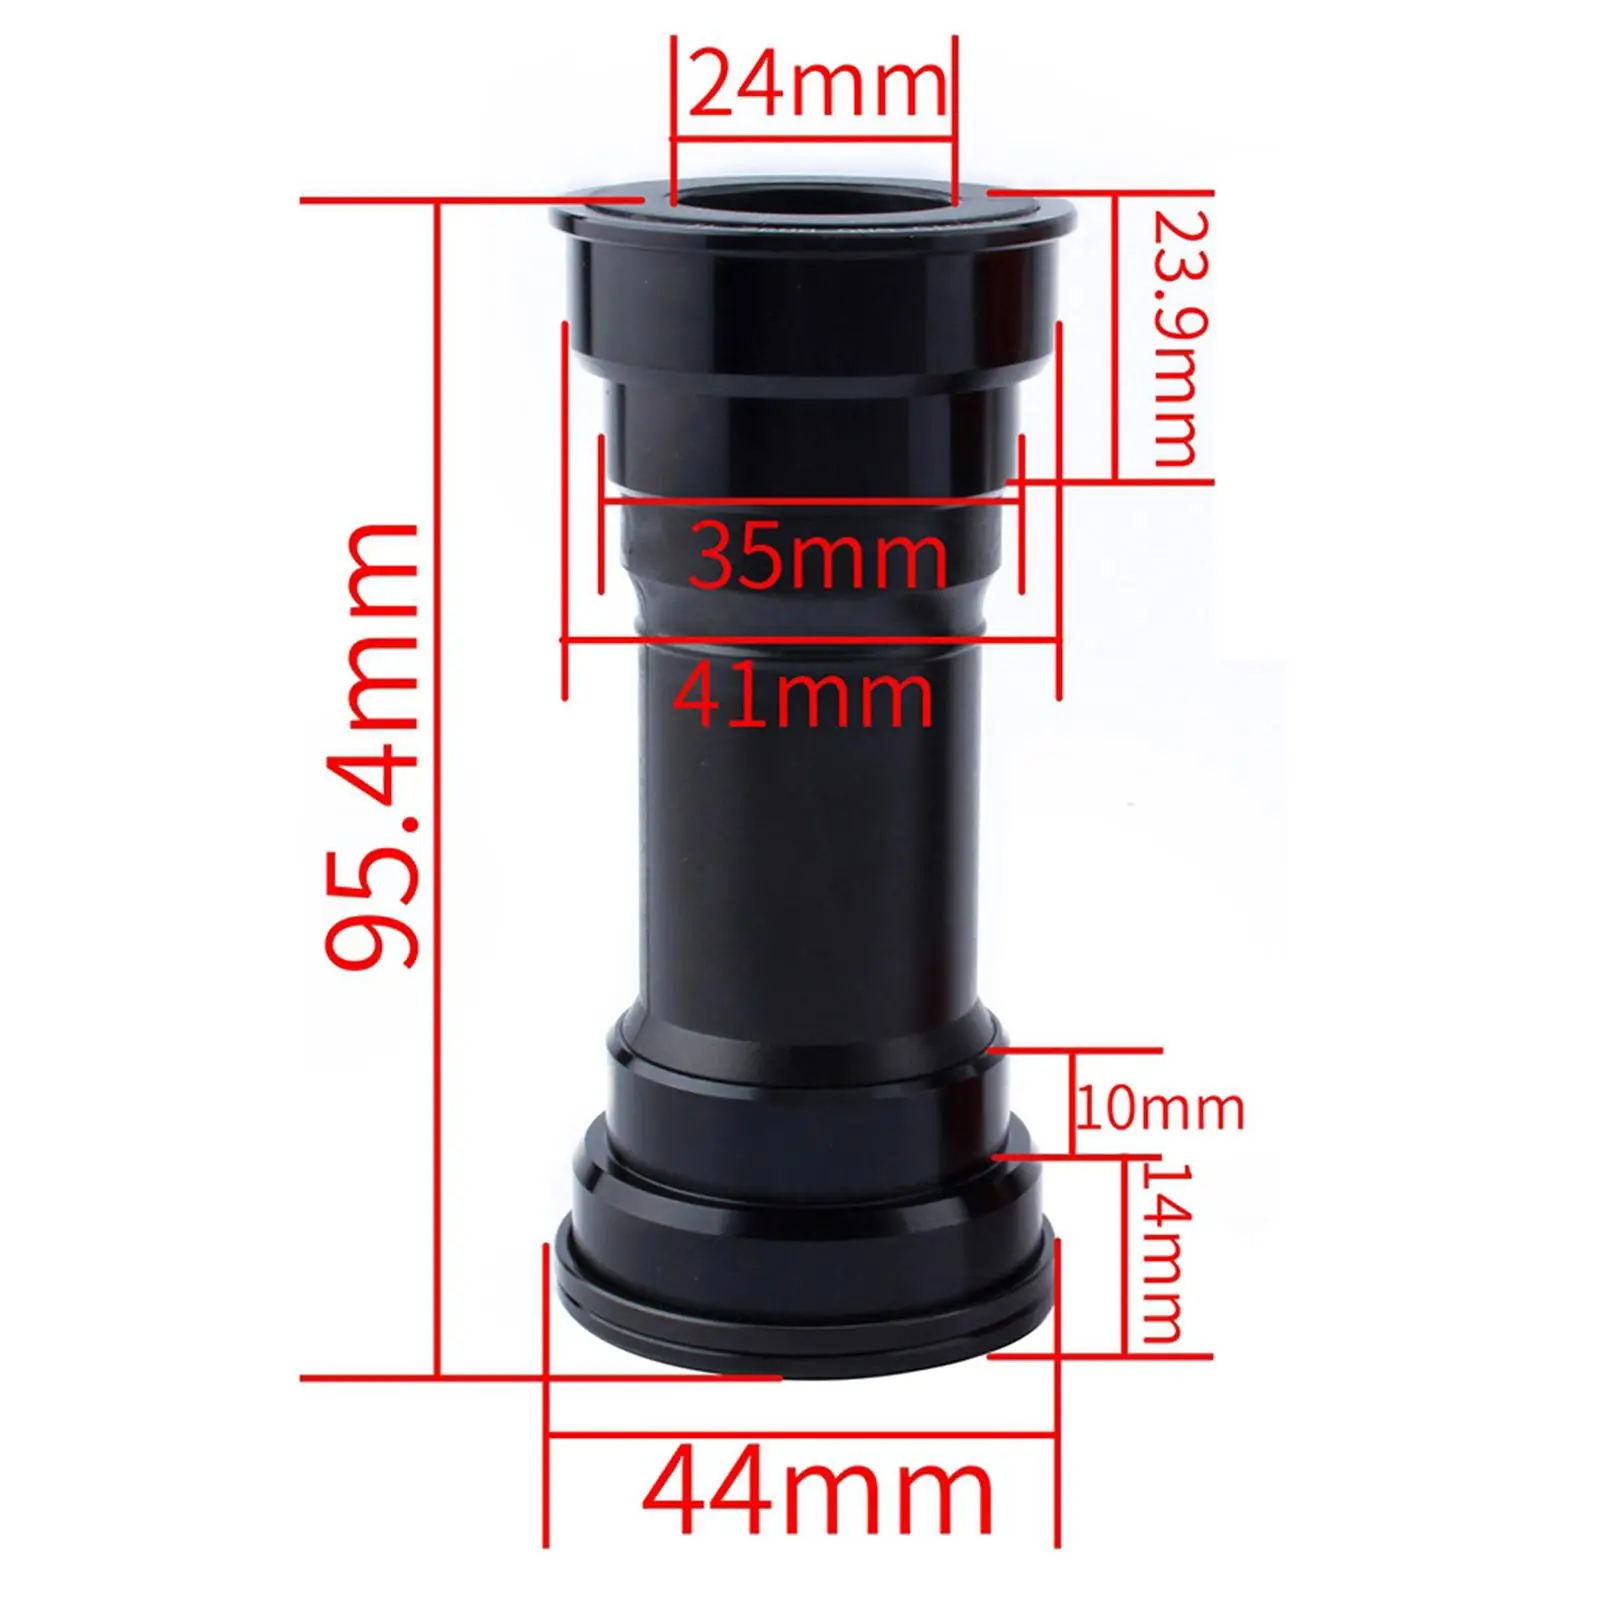 Bottom Bracket BB90-92mm High Strength for Fixed Gear Carbon Fiber Bicycle